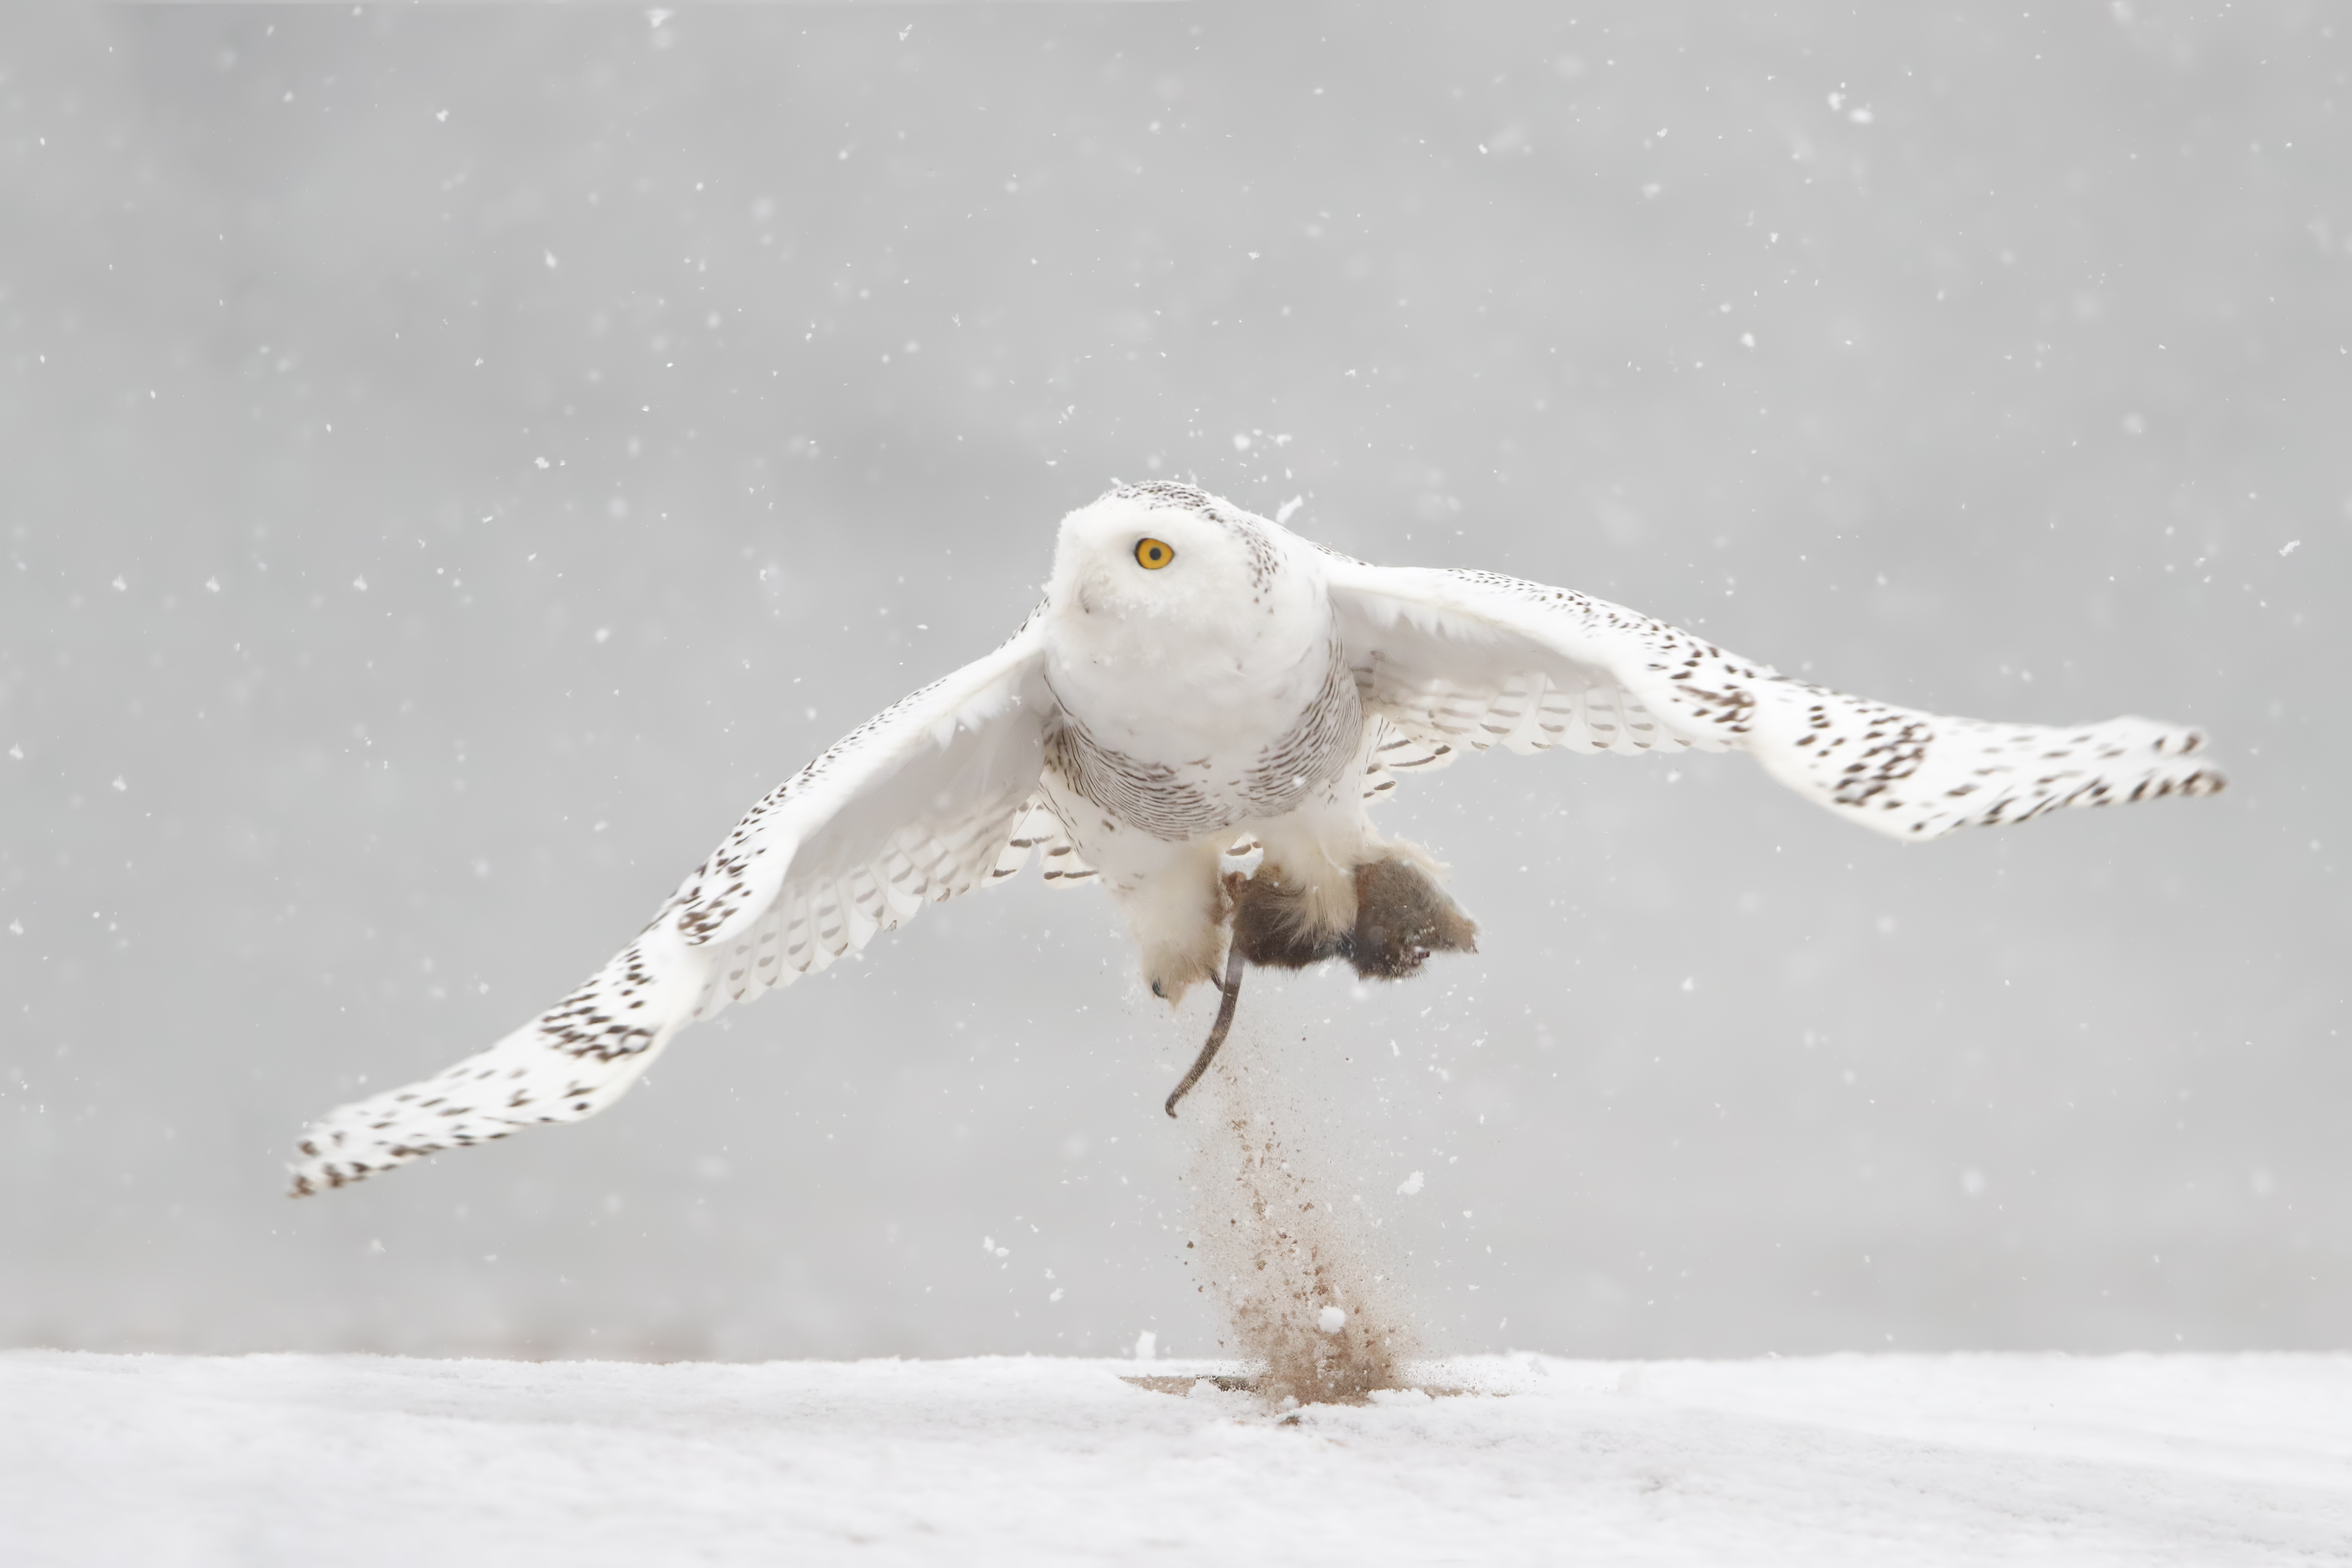 Though the Snowy Owl is an unusual sighting anywhere in New York City, Conference House Park is a good spot to look for this iconic northern species in the wintertime. (This bird was photographed hunting there in December 2017.) Photo: Isaac Grant